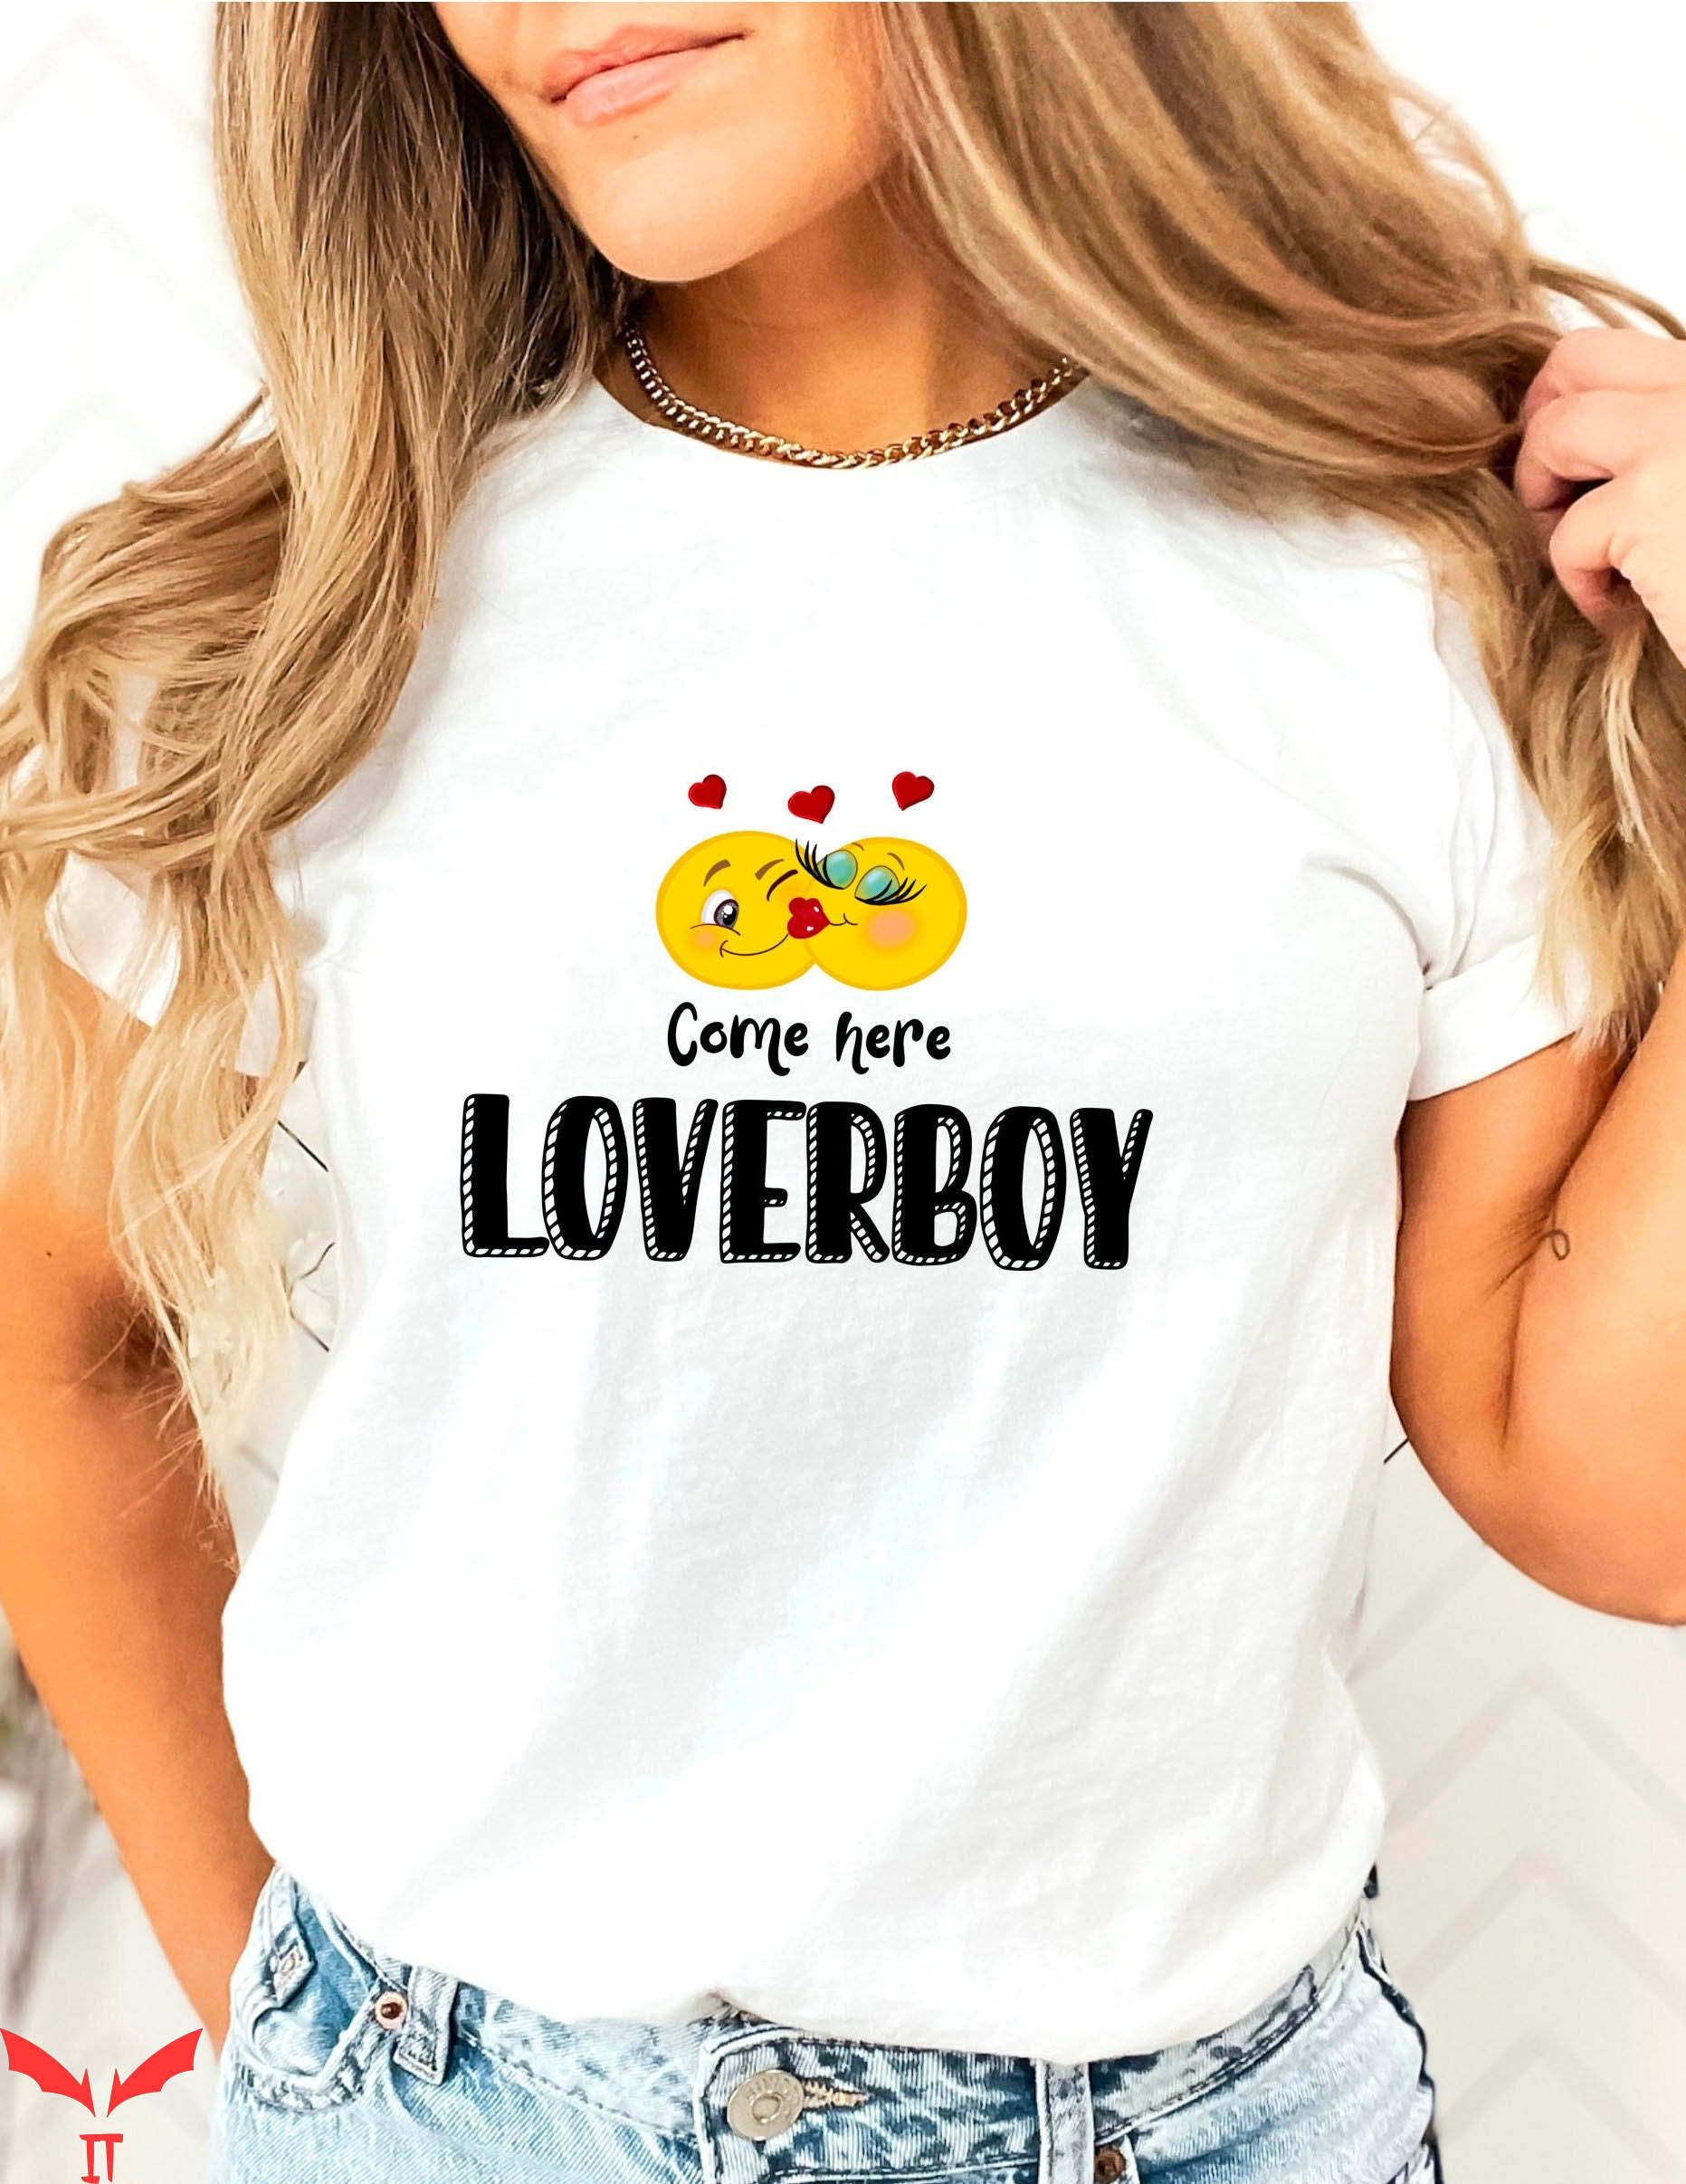 Loverboy T-Shirt Kissing Come Here Emoji Funny Cute Tee